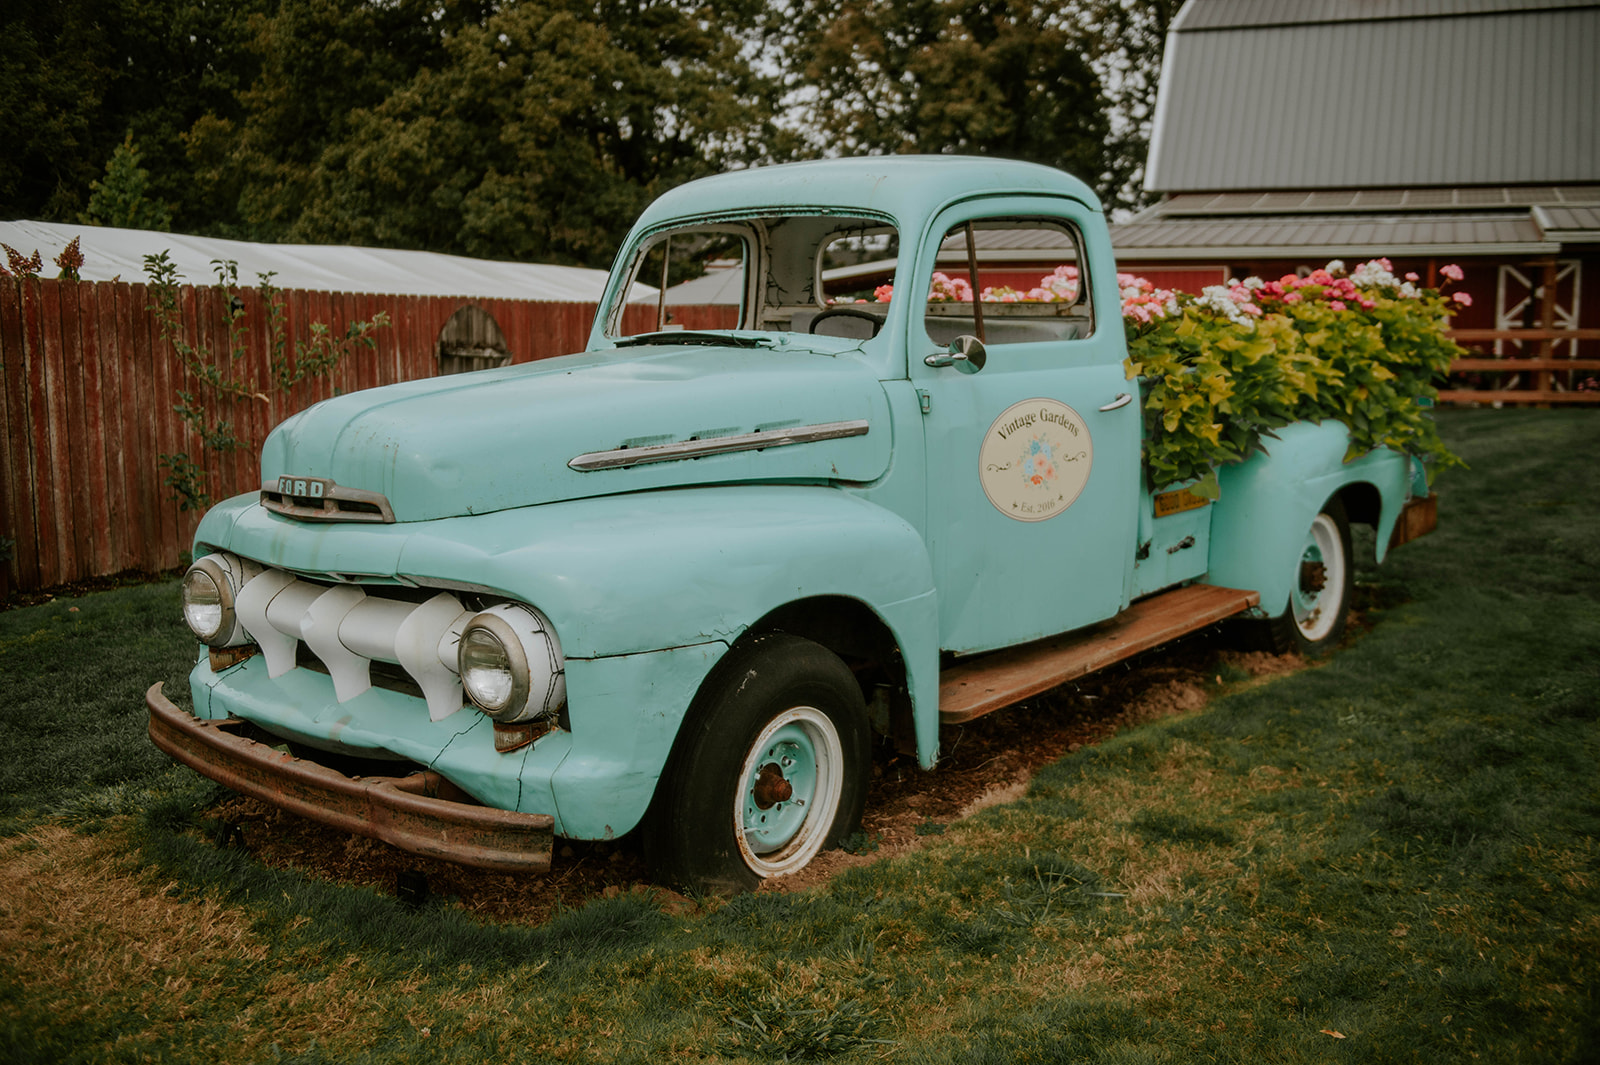 Vintage Gardens Rustic Events garden truck - turquoise vintage Ford.